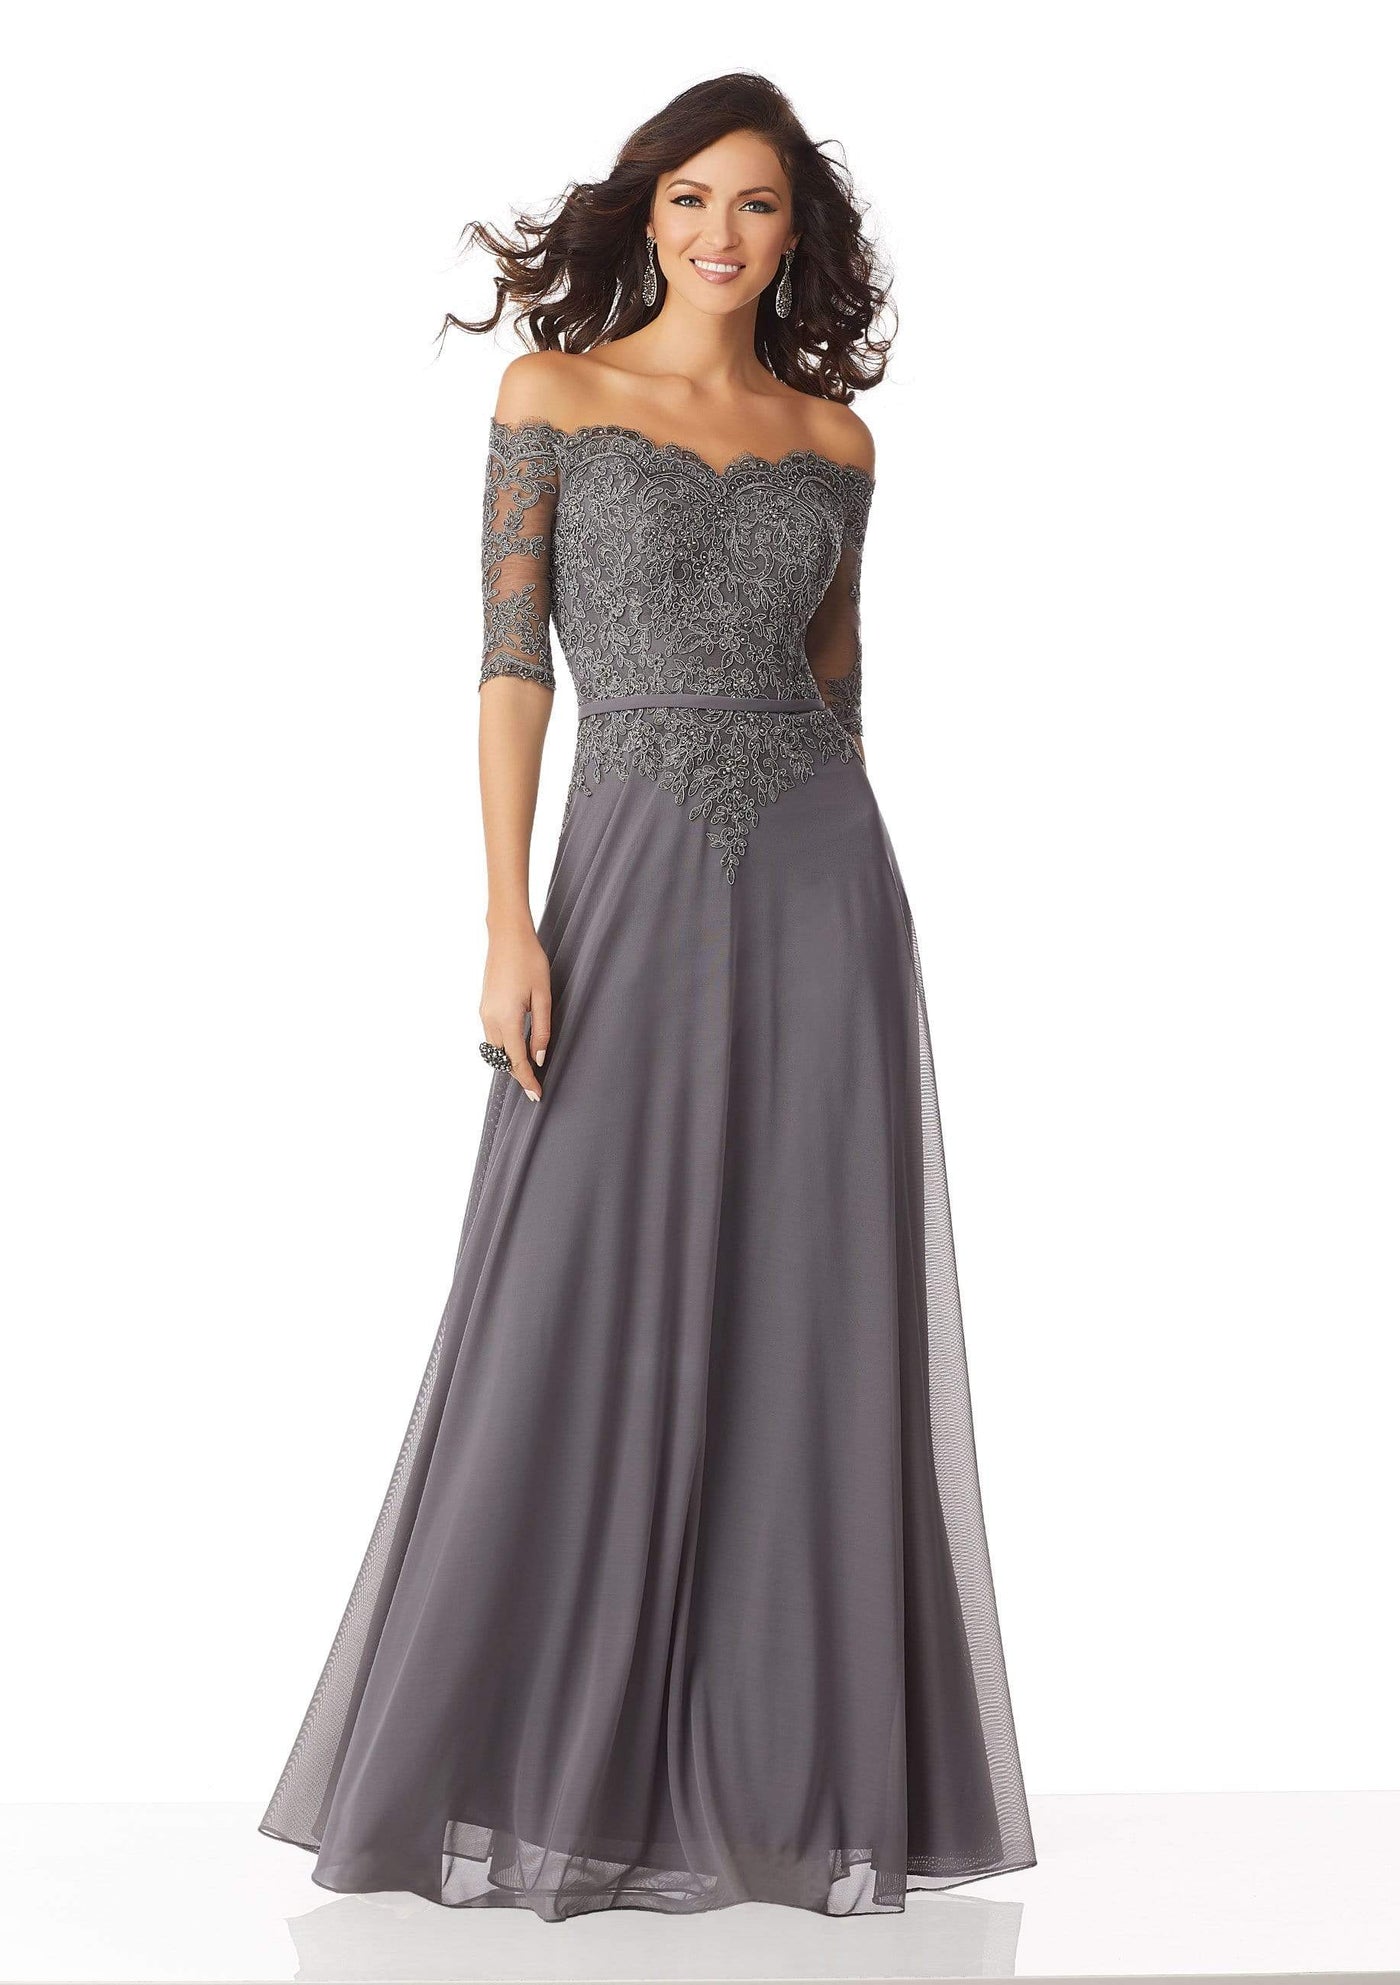 MGNY By Mori Lee - 71822 Beaded Lace Off-Shoulder A-Line Gown Mother of the Bride Dresses 0 / Charcoal